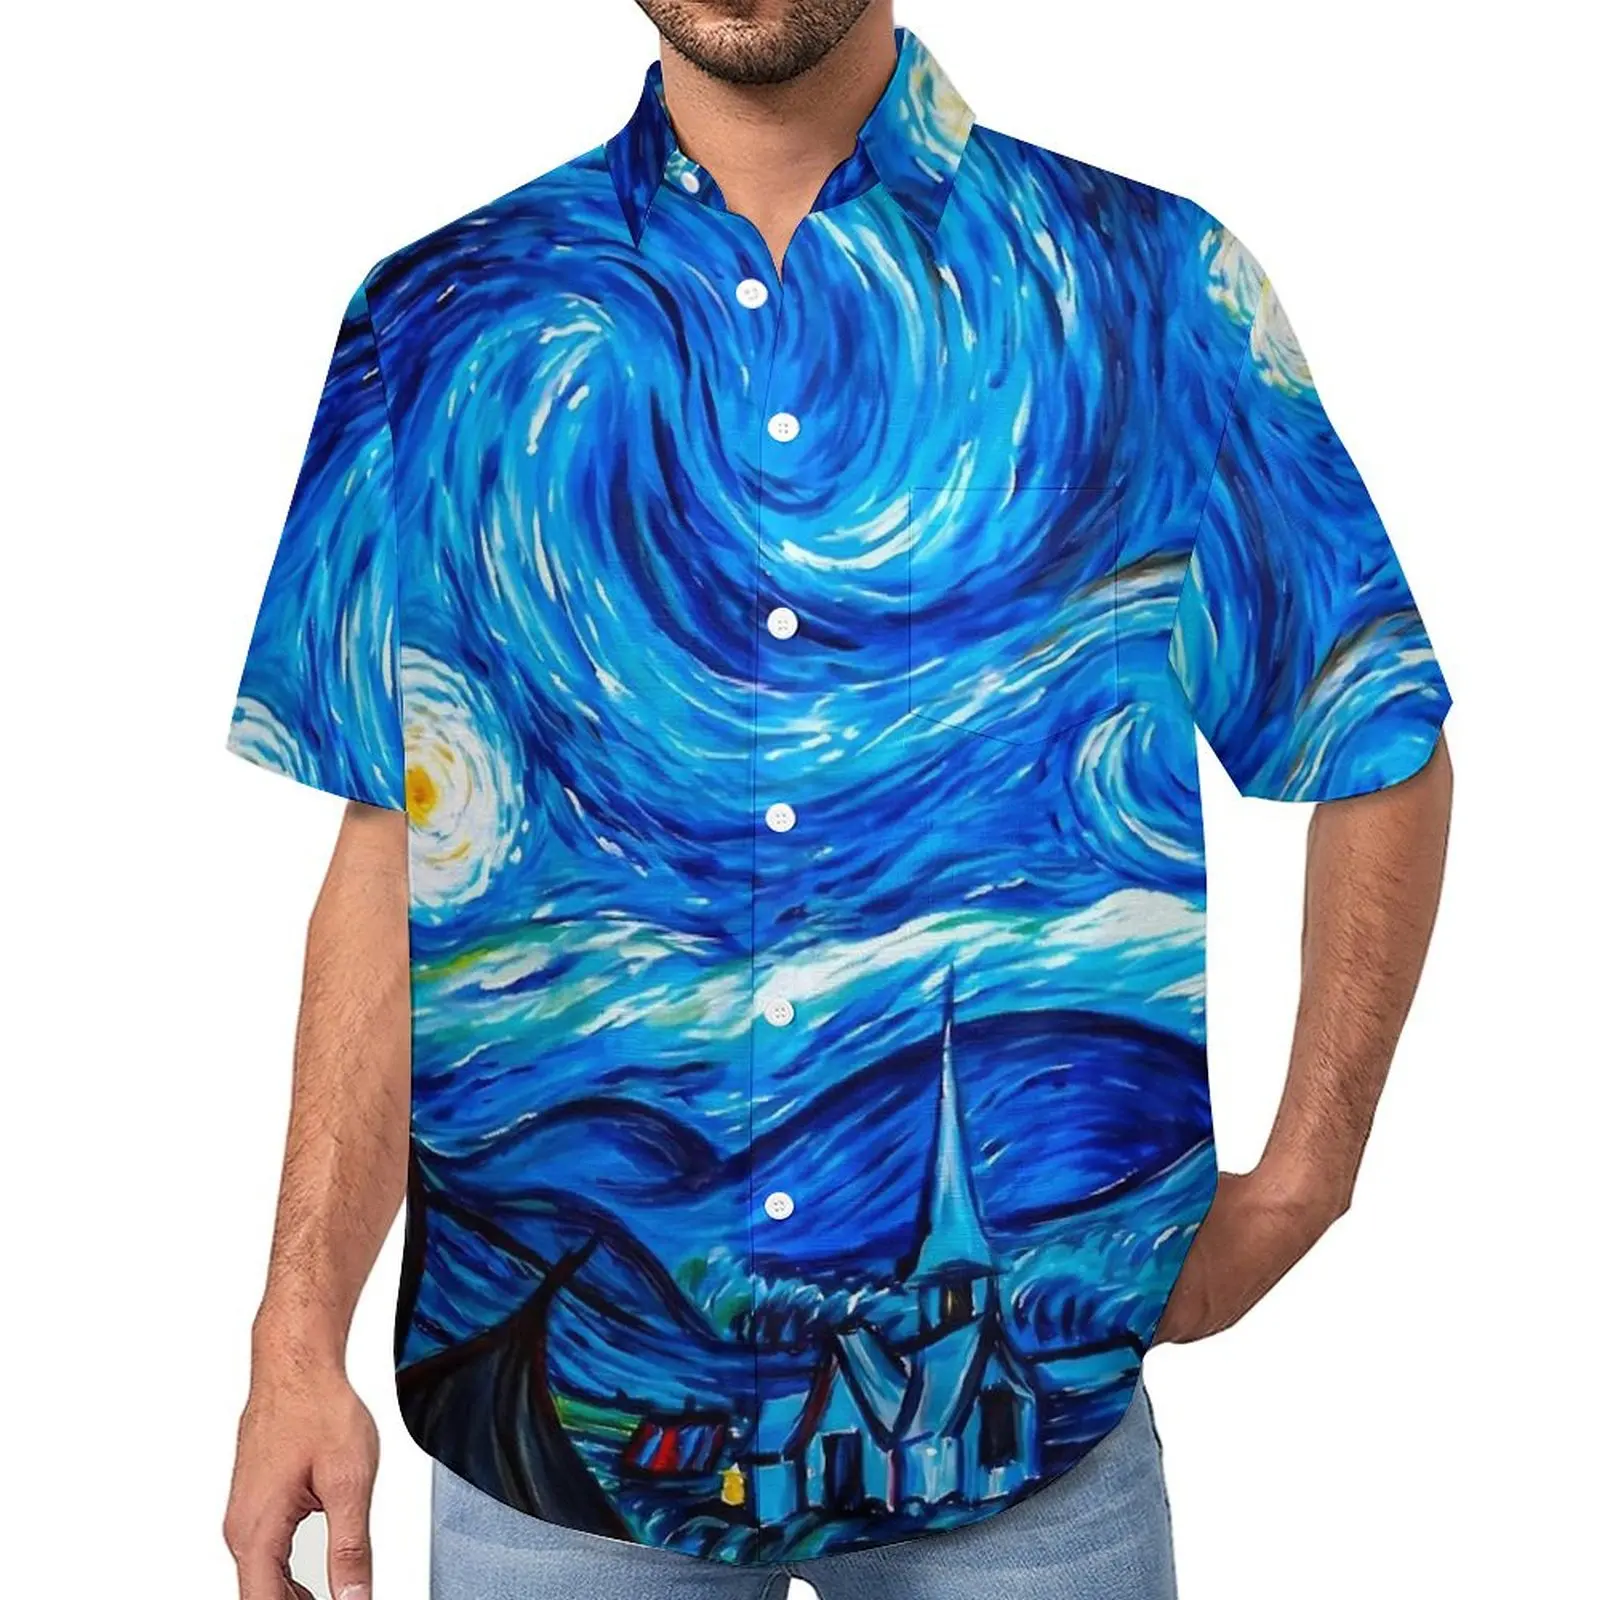 

Classic Starry Night Beach Shirt Vincent Van Gogh Summer Casual Shirts Men Stylish Blouses Short Sleeve Graphic Tops Plus Size